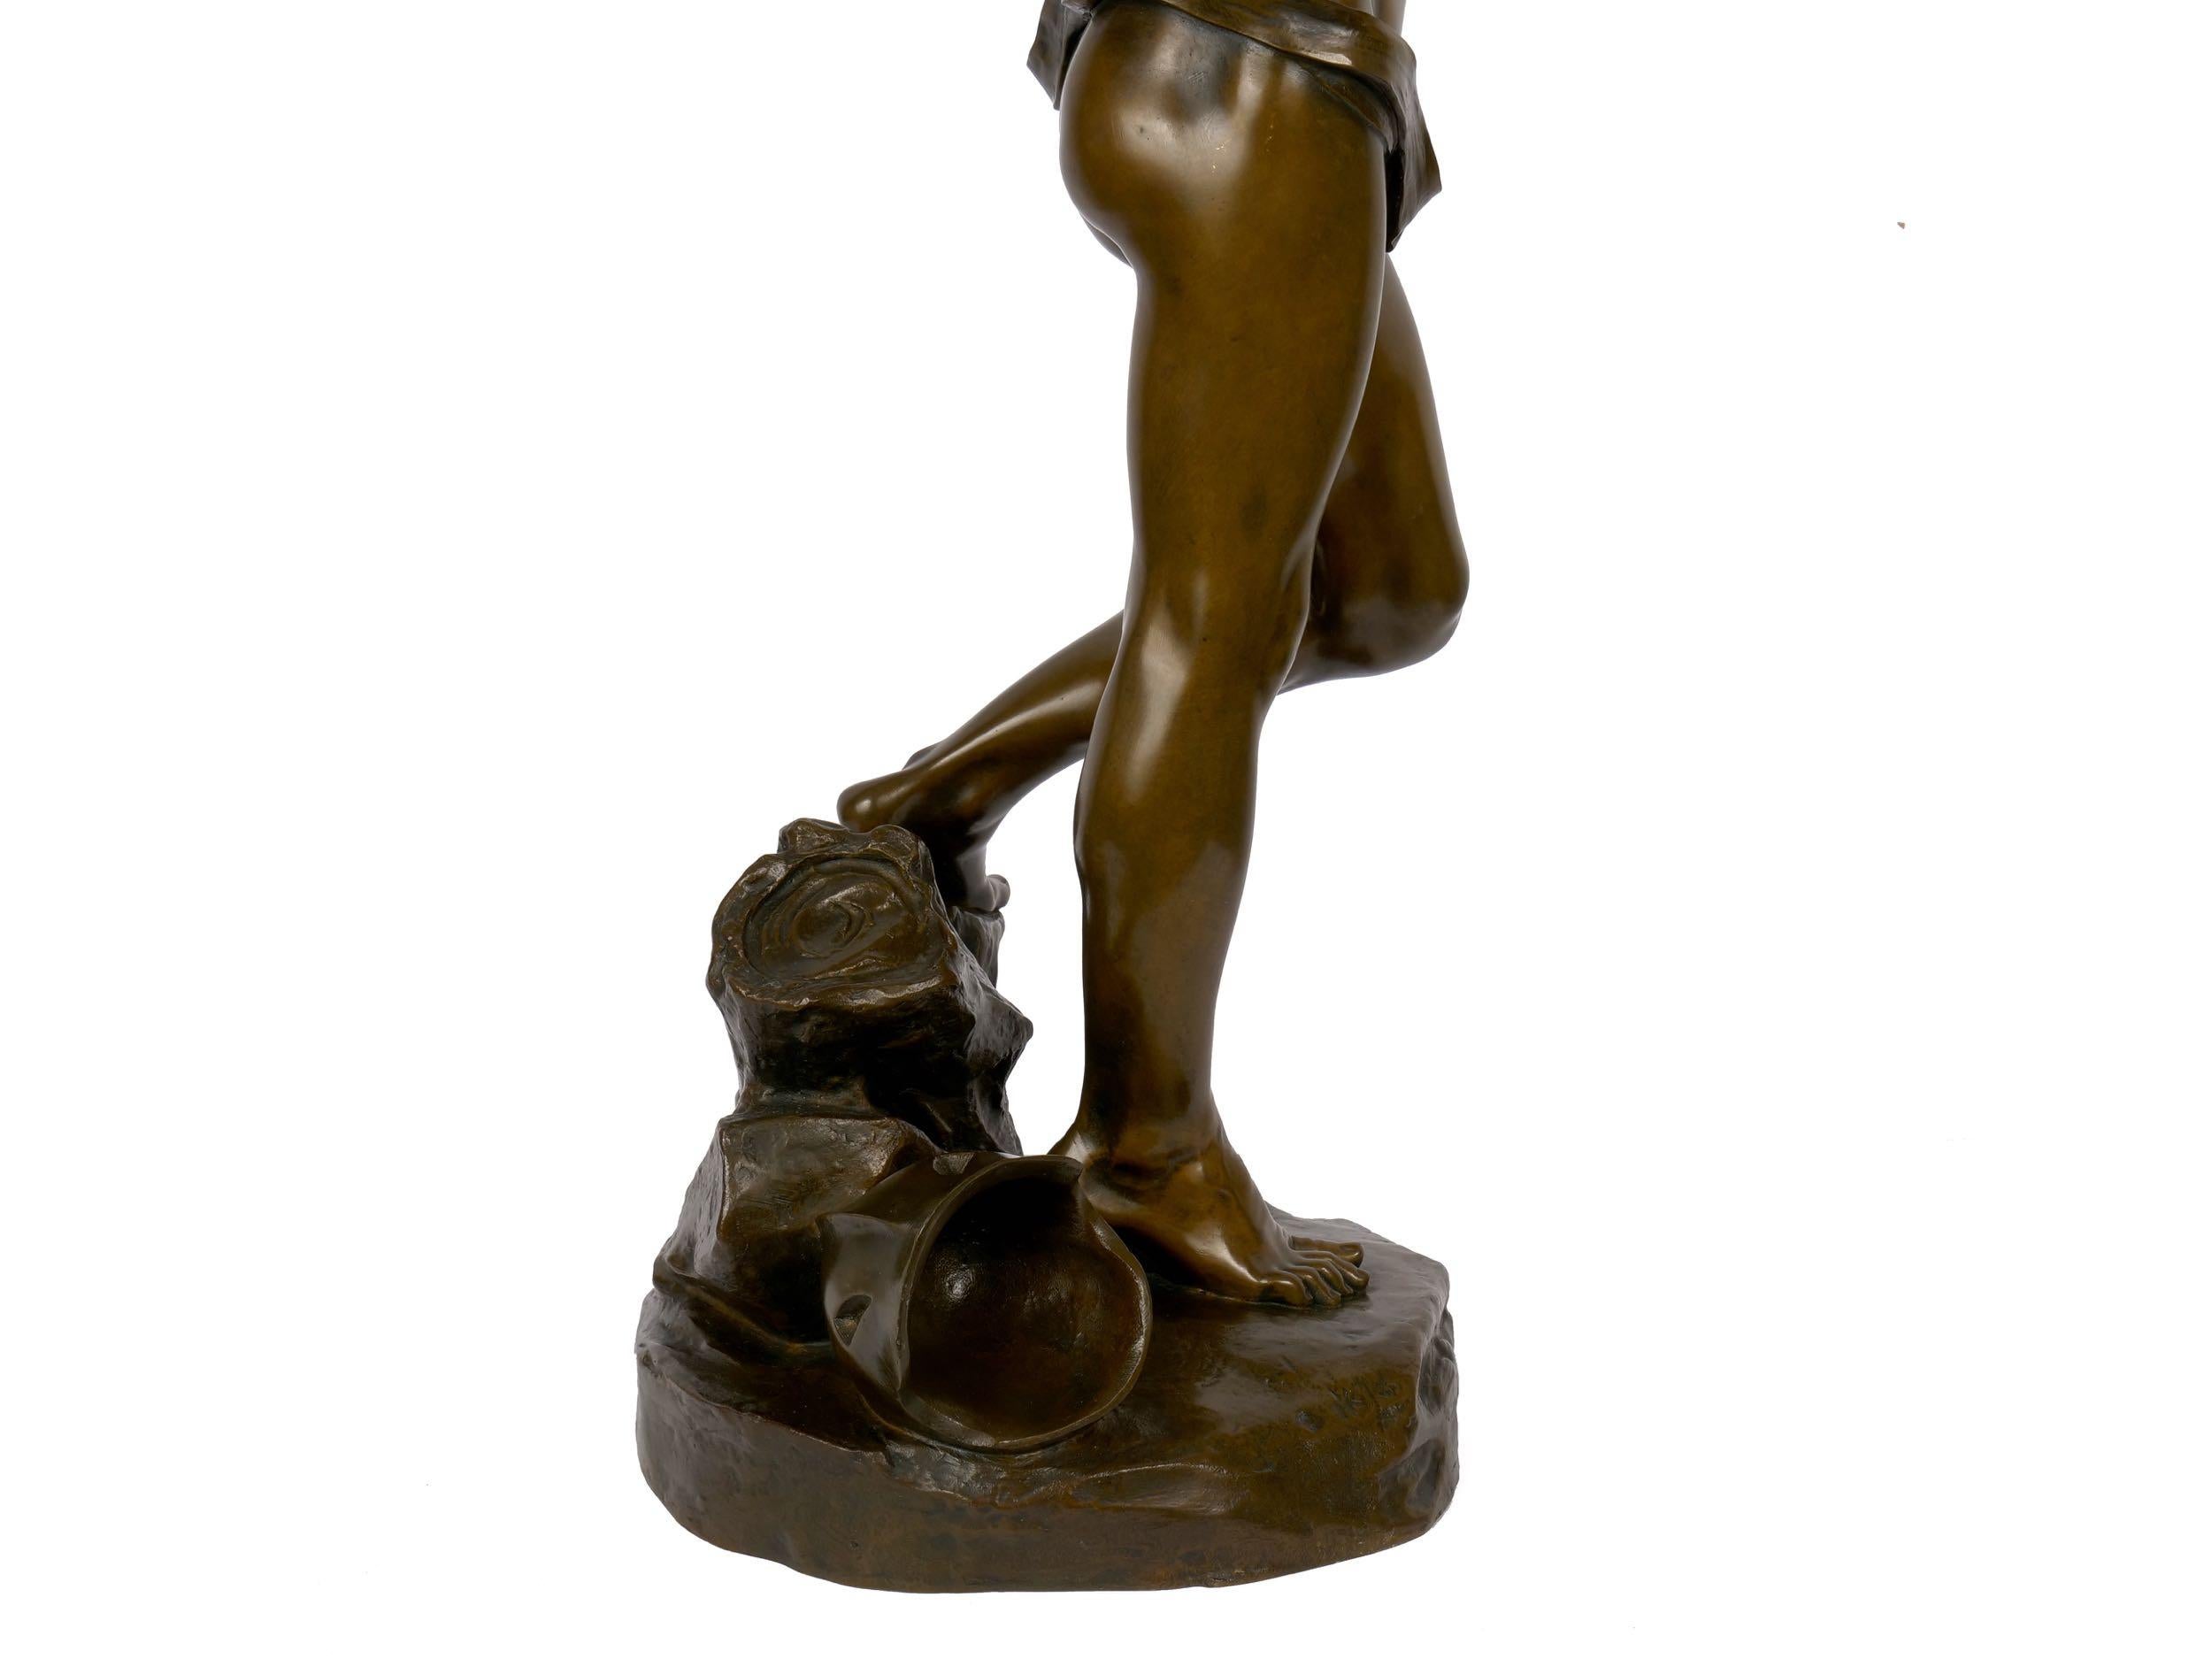 “Jason and the Golden Fleece” '1875' French Bronze Sculpture by Lanson & Susse 9